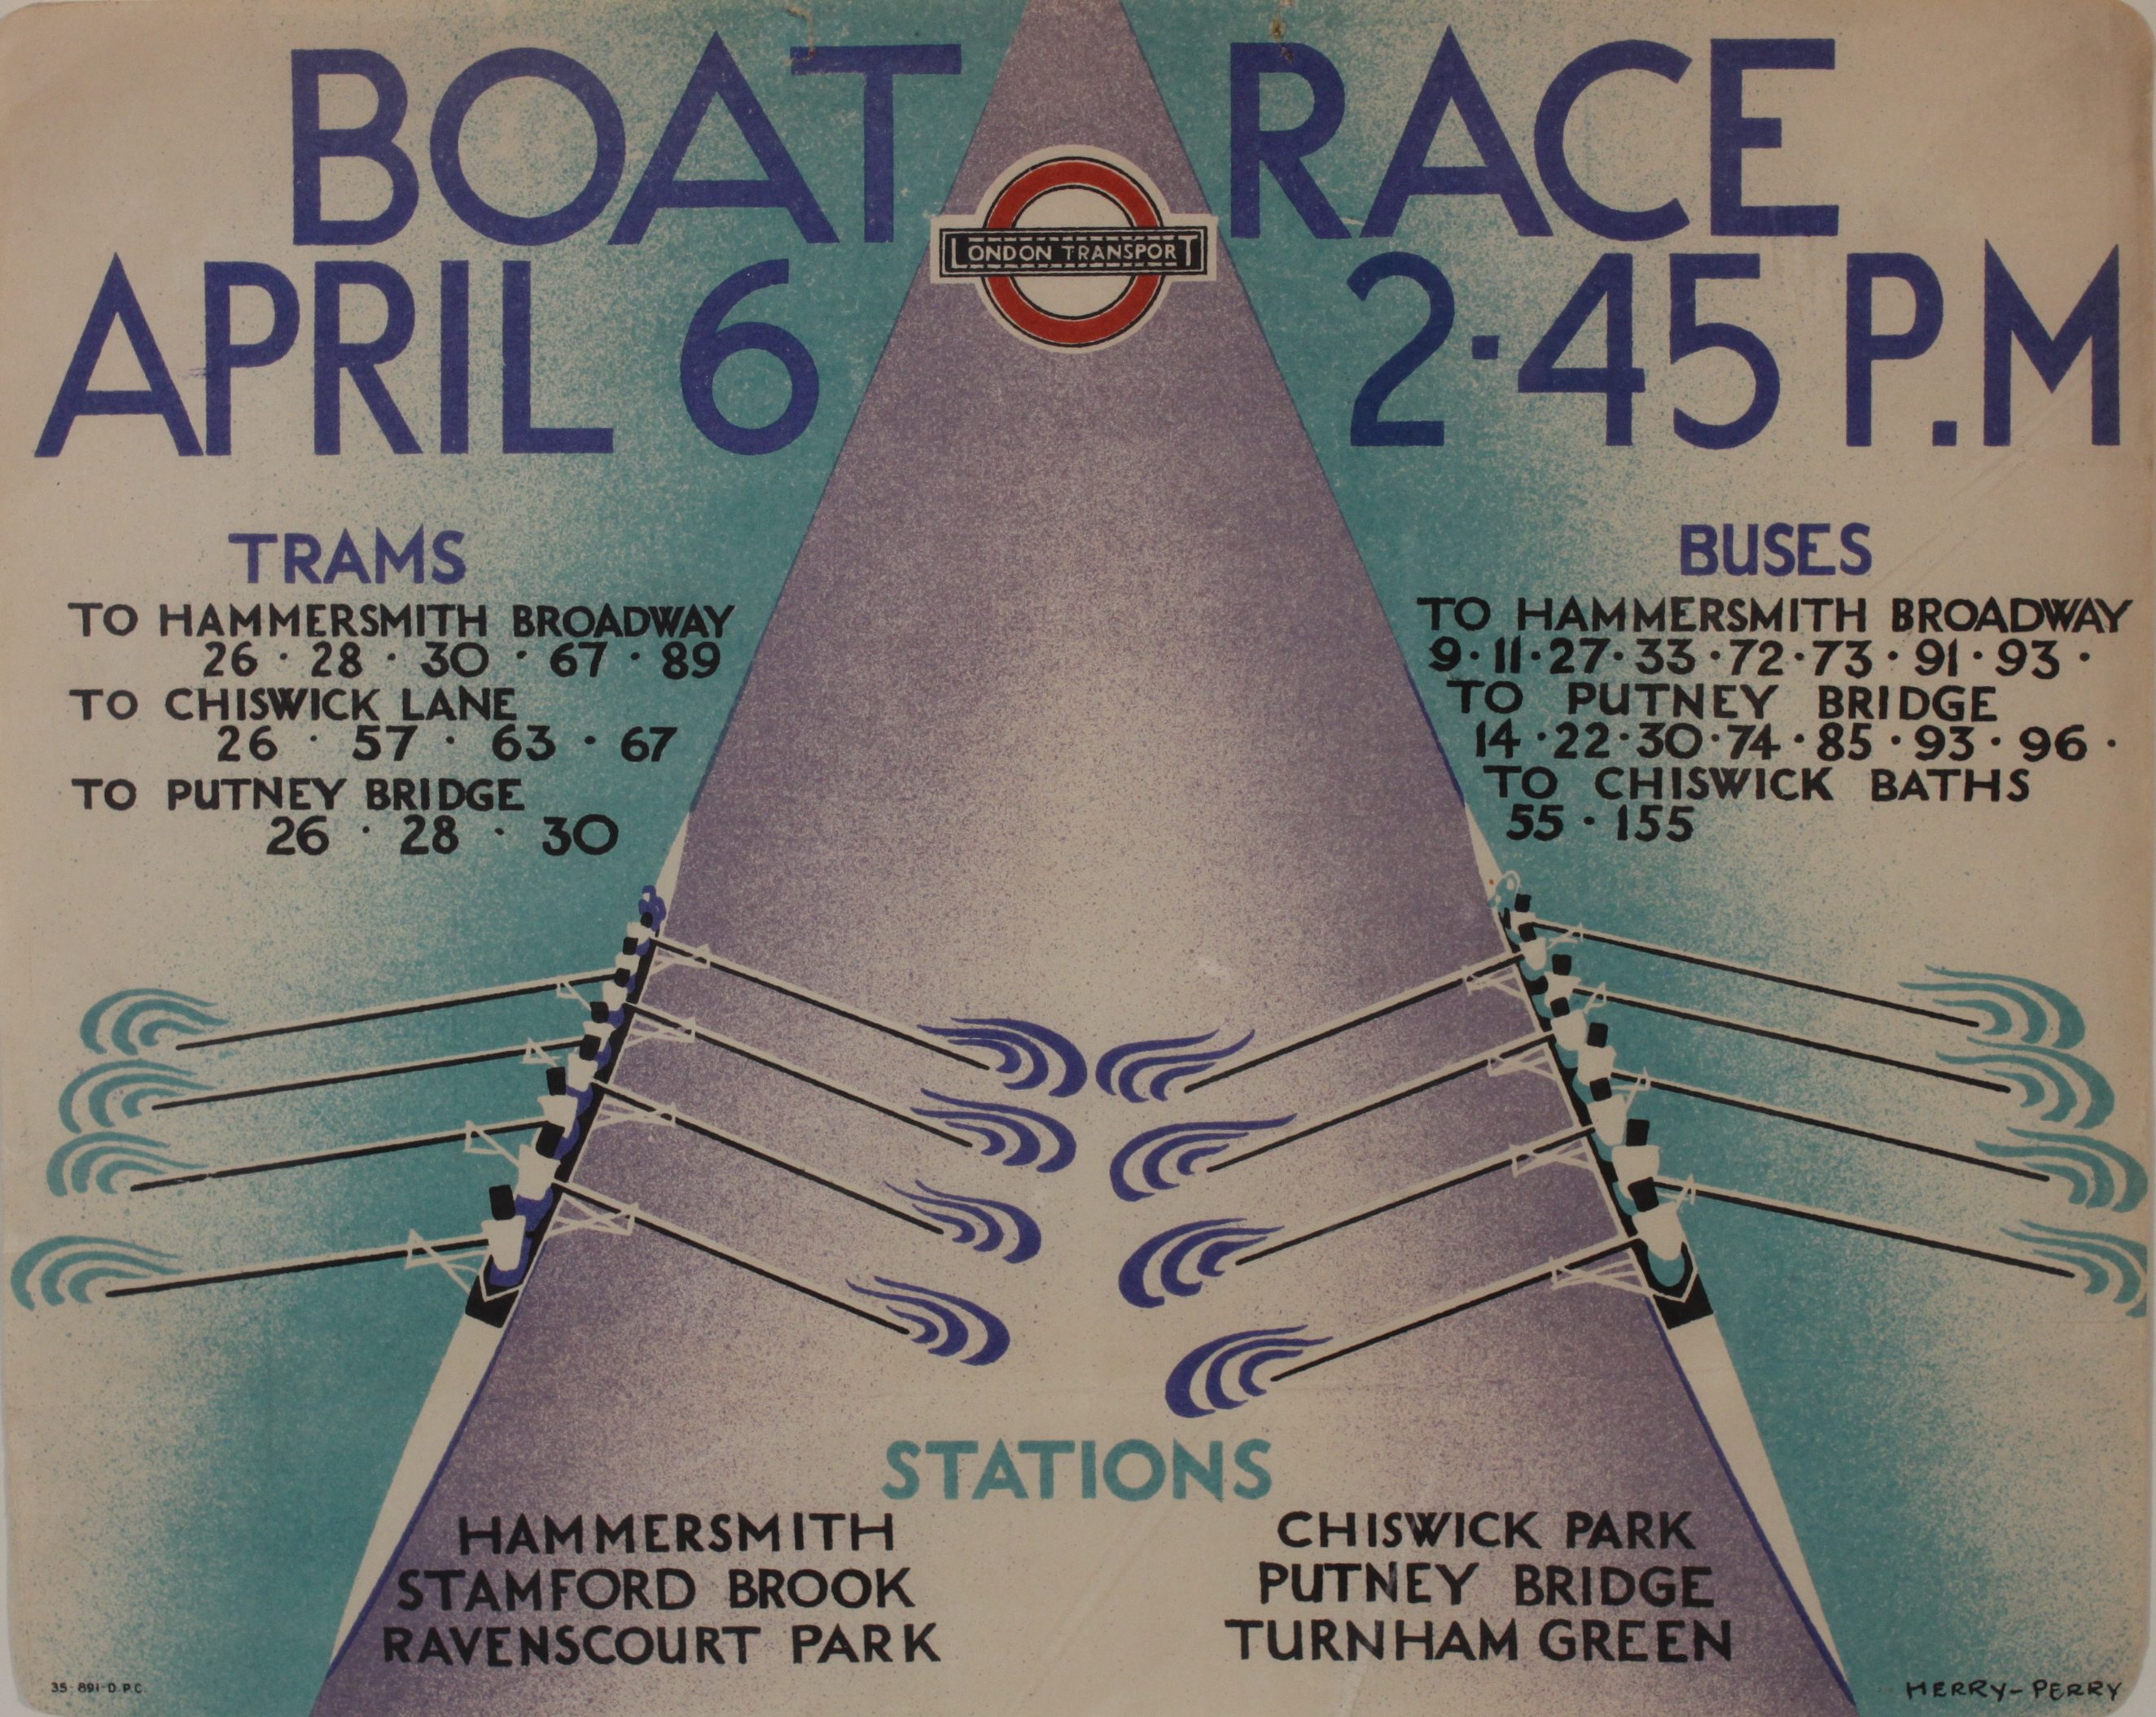 Herry-Perry (Heather Perry 1893-1962) Boat Race, panel poster No 891 printed for London Transport by Dangerfield Press, 1935, 25.5 x 31.8 cm (est. £600-£800). Onslows image